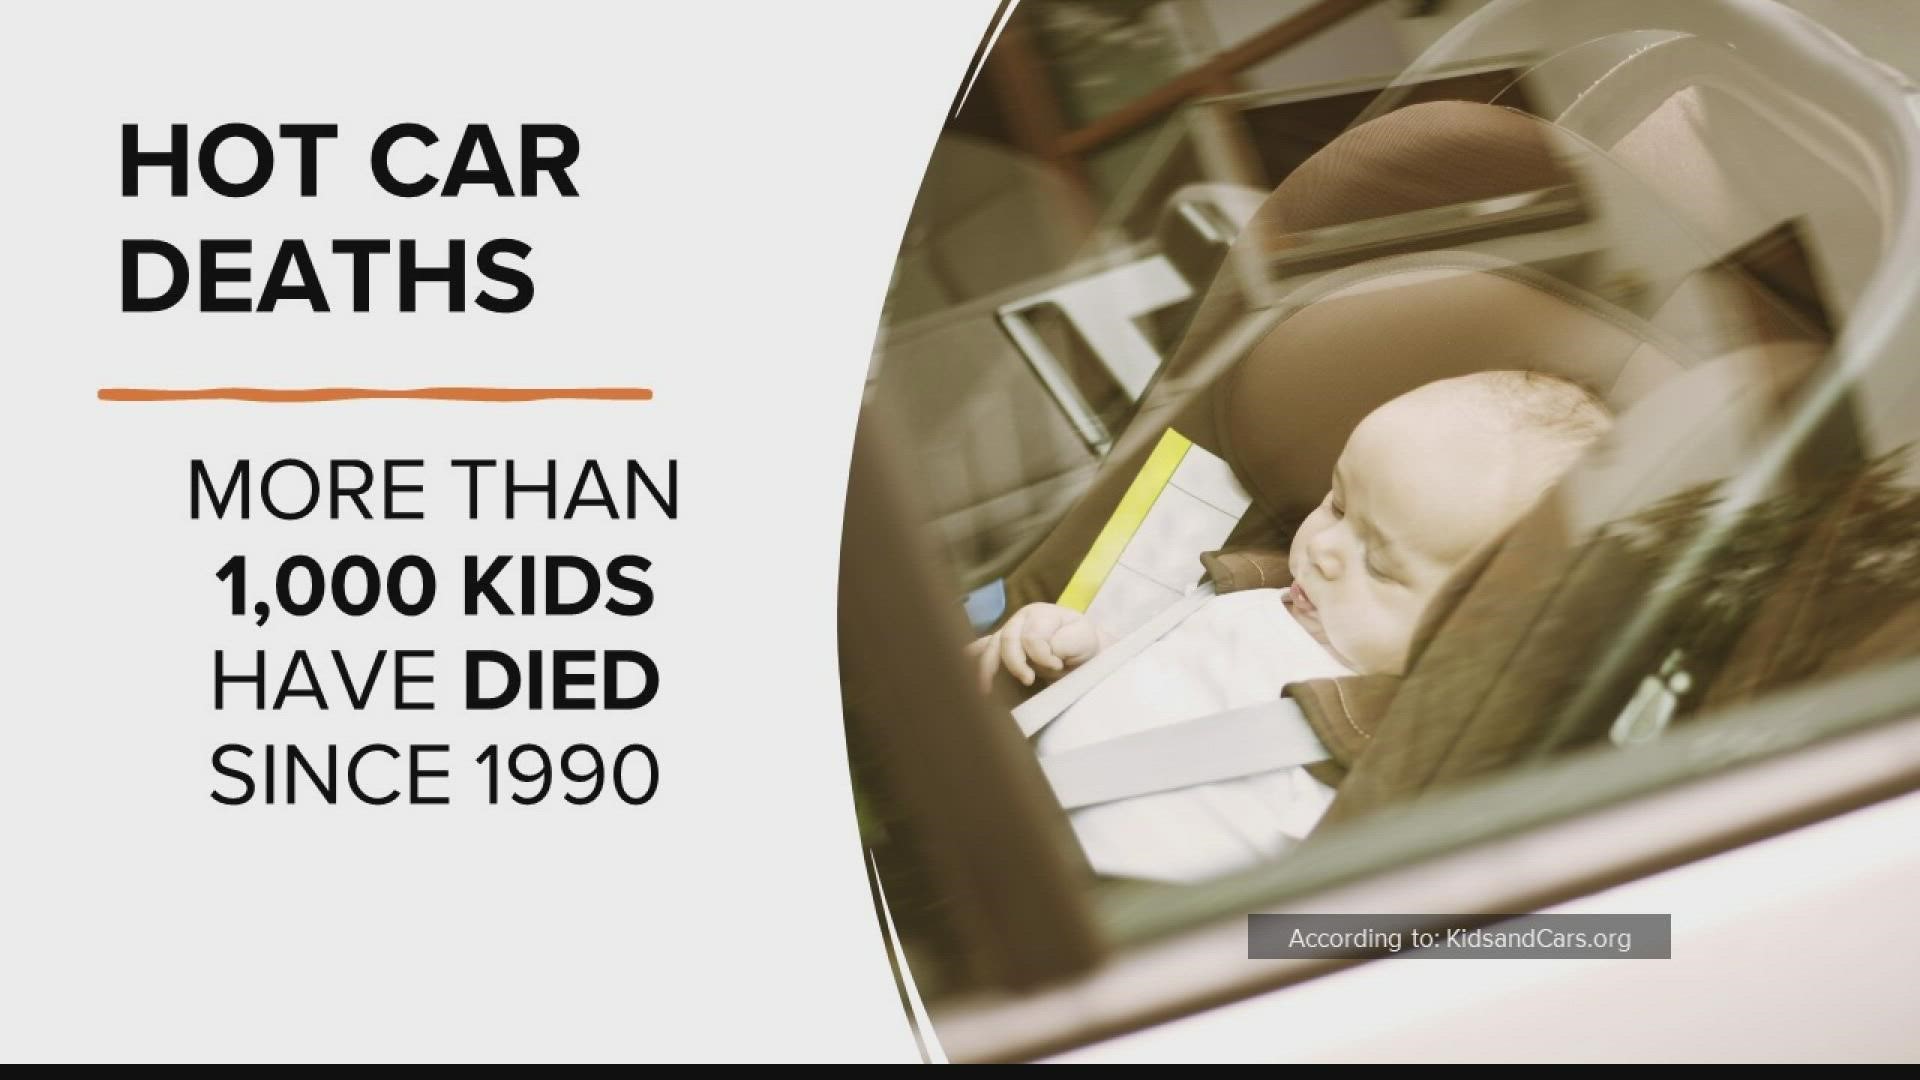 So far in 2021, 23 children have died in hot cars.